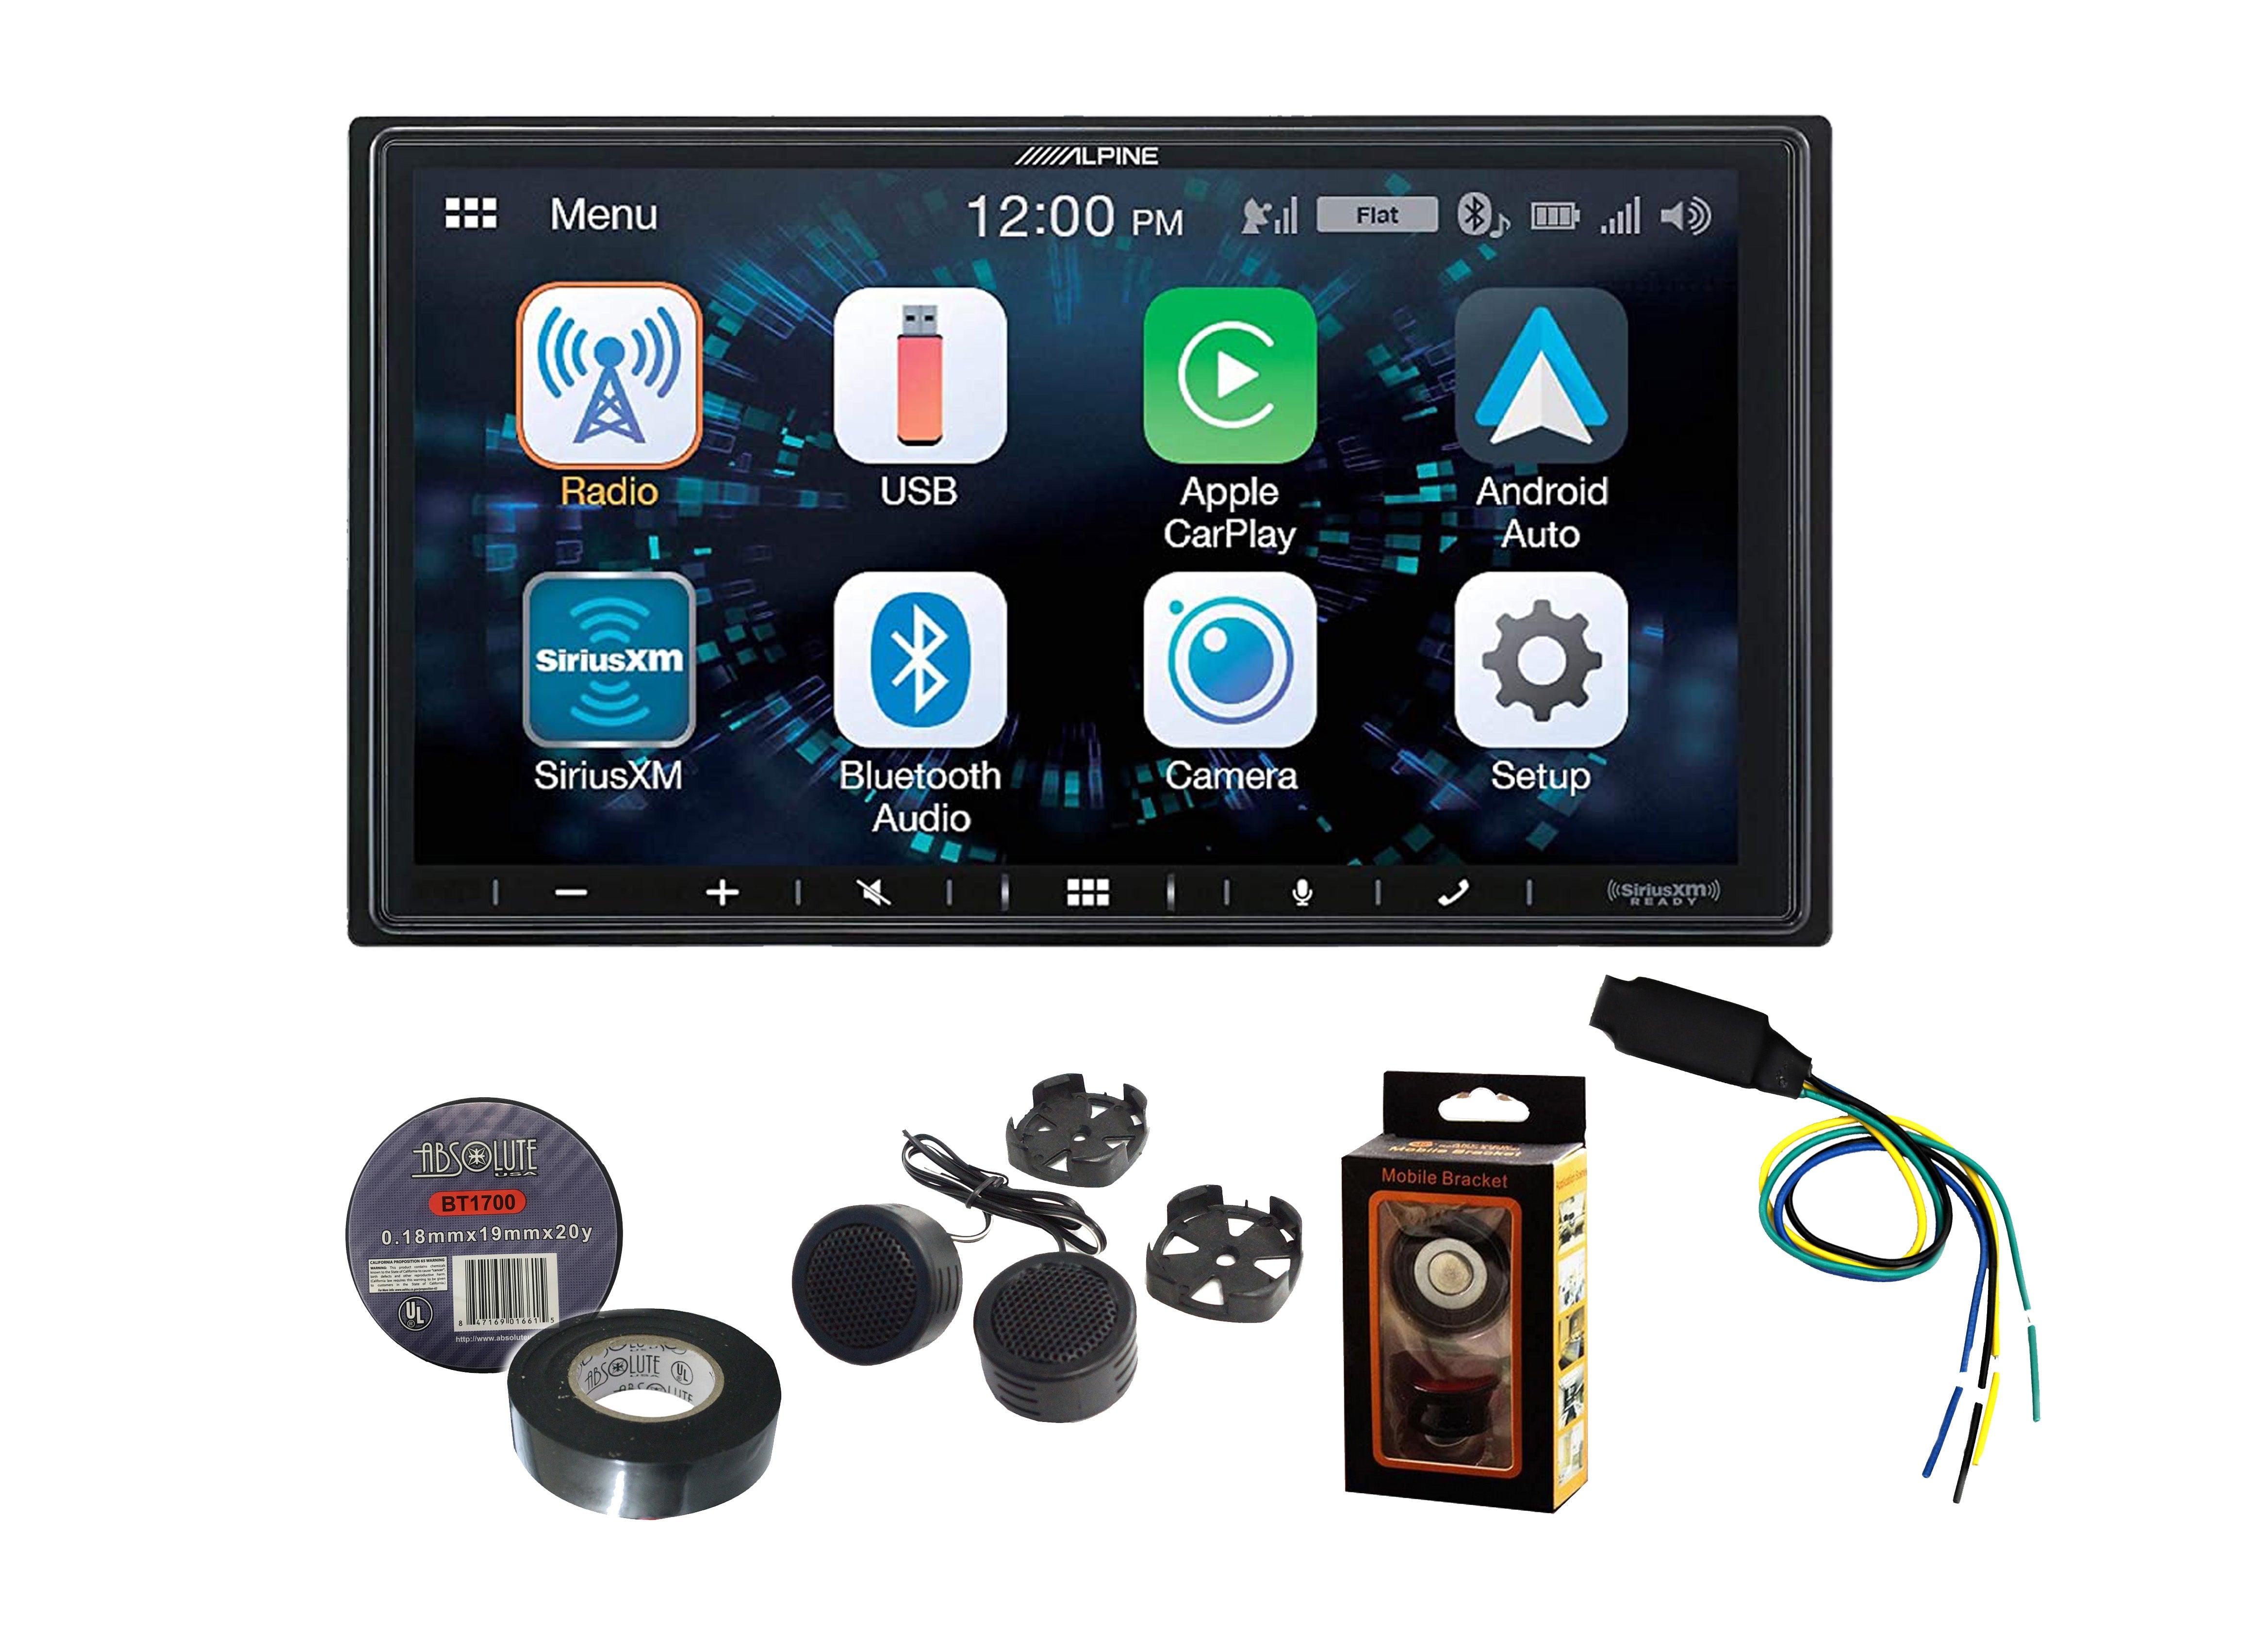 Alpine iLX-W670 7" Mech-Less Receiver Compatible with Apple CarPlay and Android Auto +Absolute Video in Motion trigger interface for Double DIN Stereo's+Free Tweeter + Mobile Holder+Electrical Tape